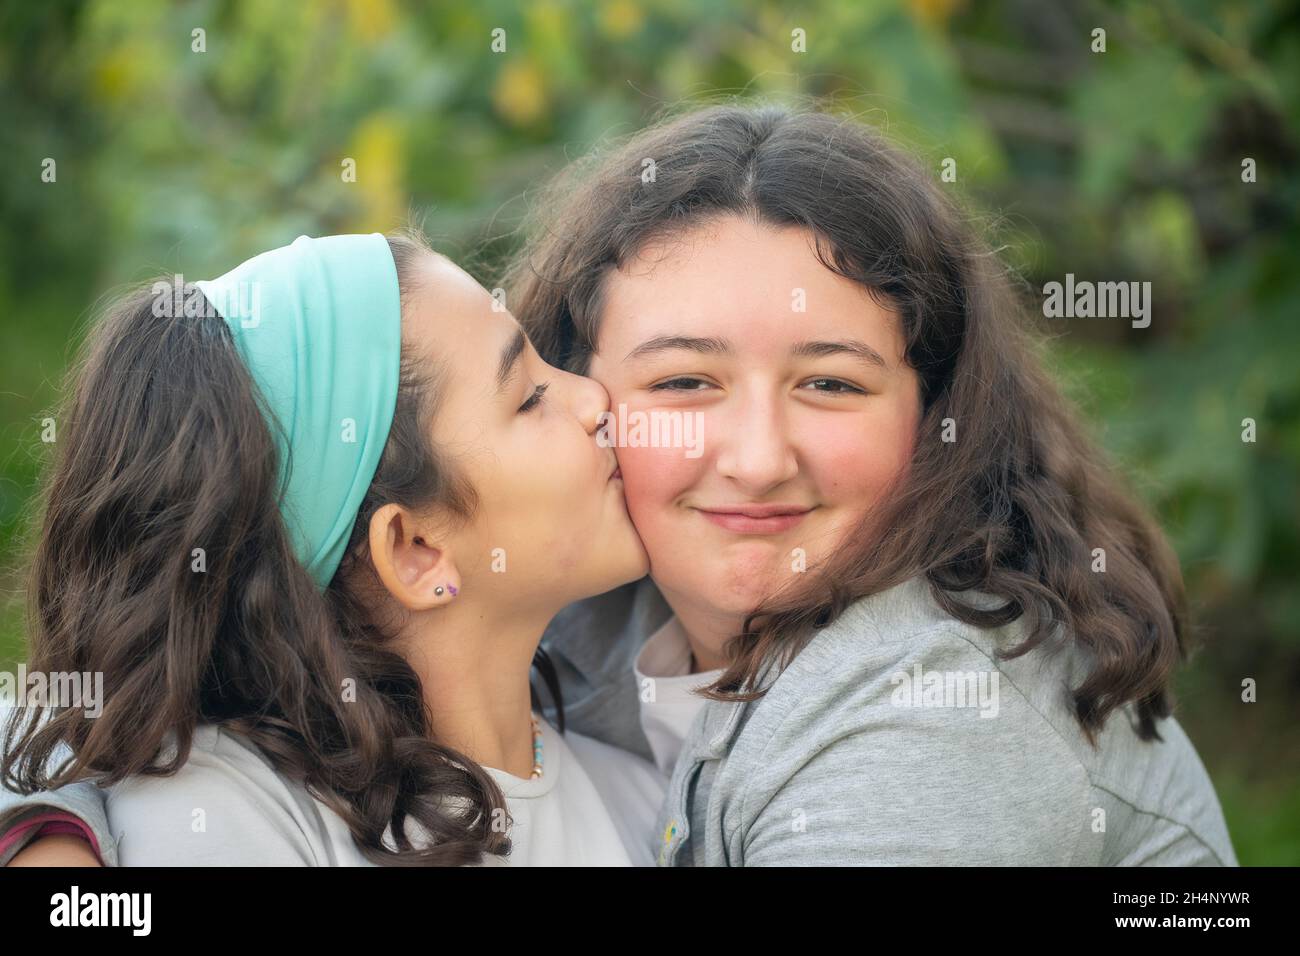 Two young girls embracing and kissing outdoor Stock Photo